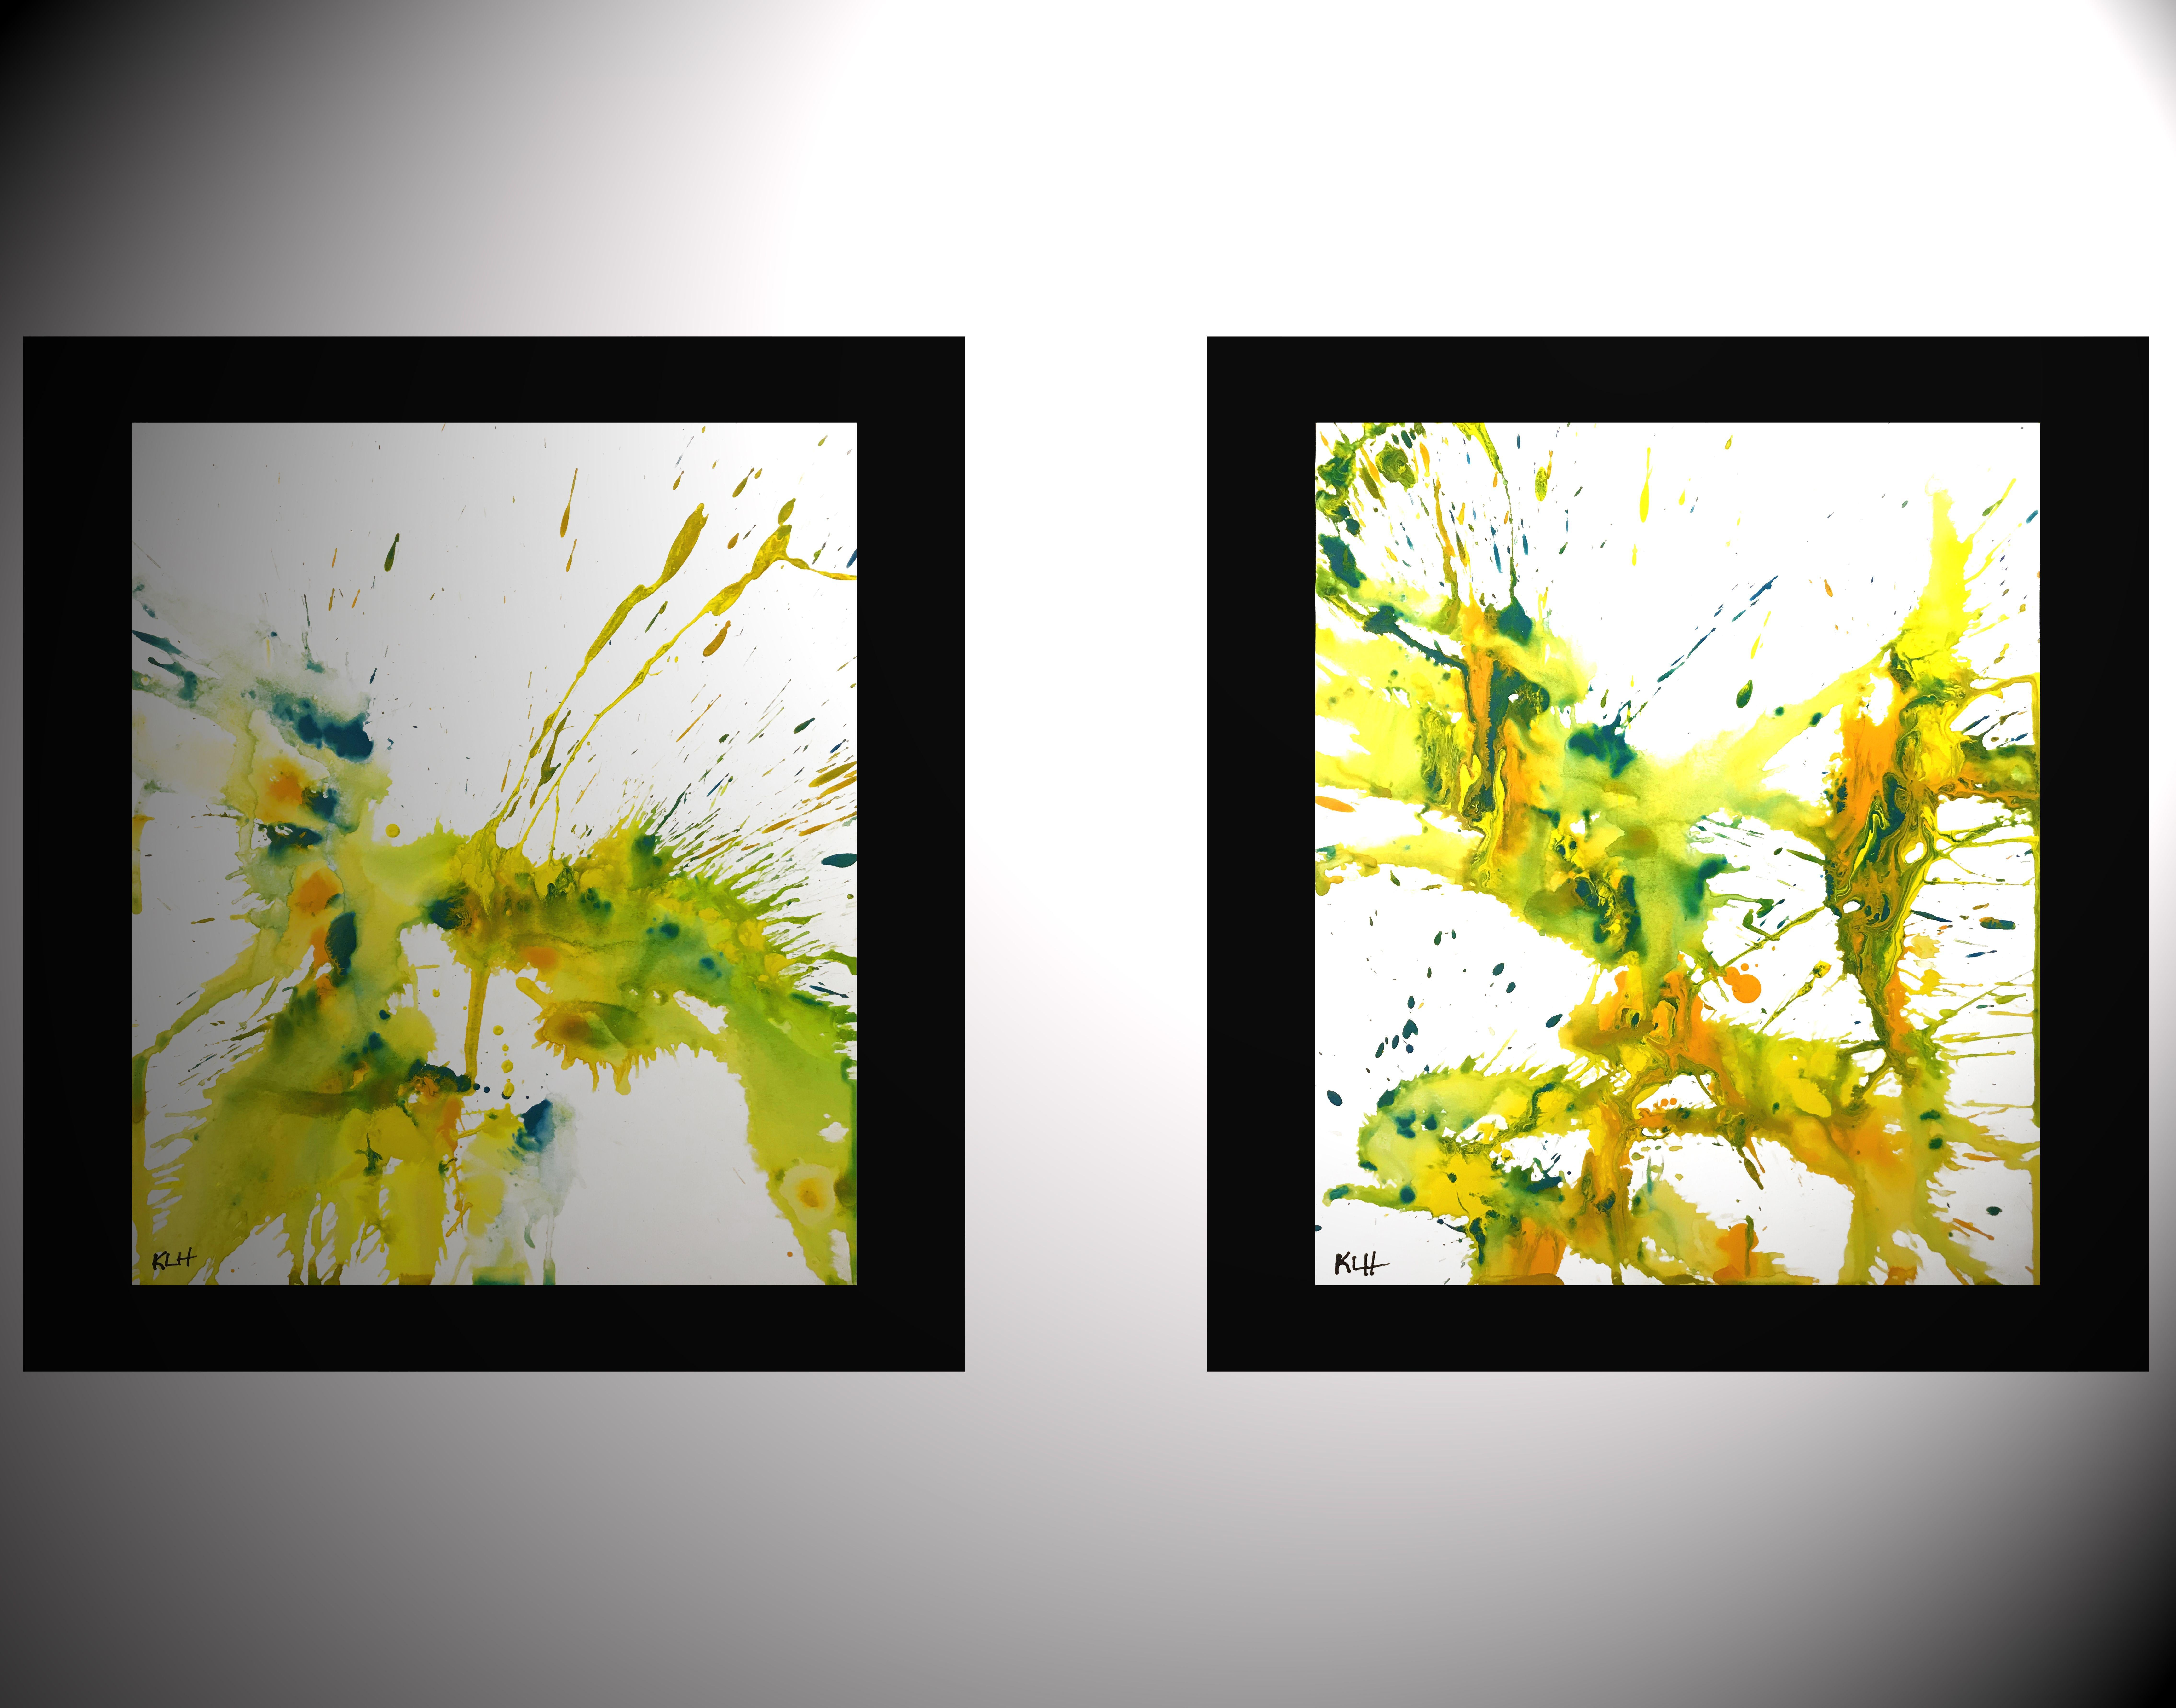 Kris Haas Abstract Drawing - 2 - Chaotic Crazy Lemon Lime Paintings 4172.4173, Painting, Watercolor on Paper